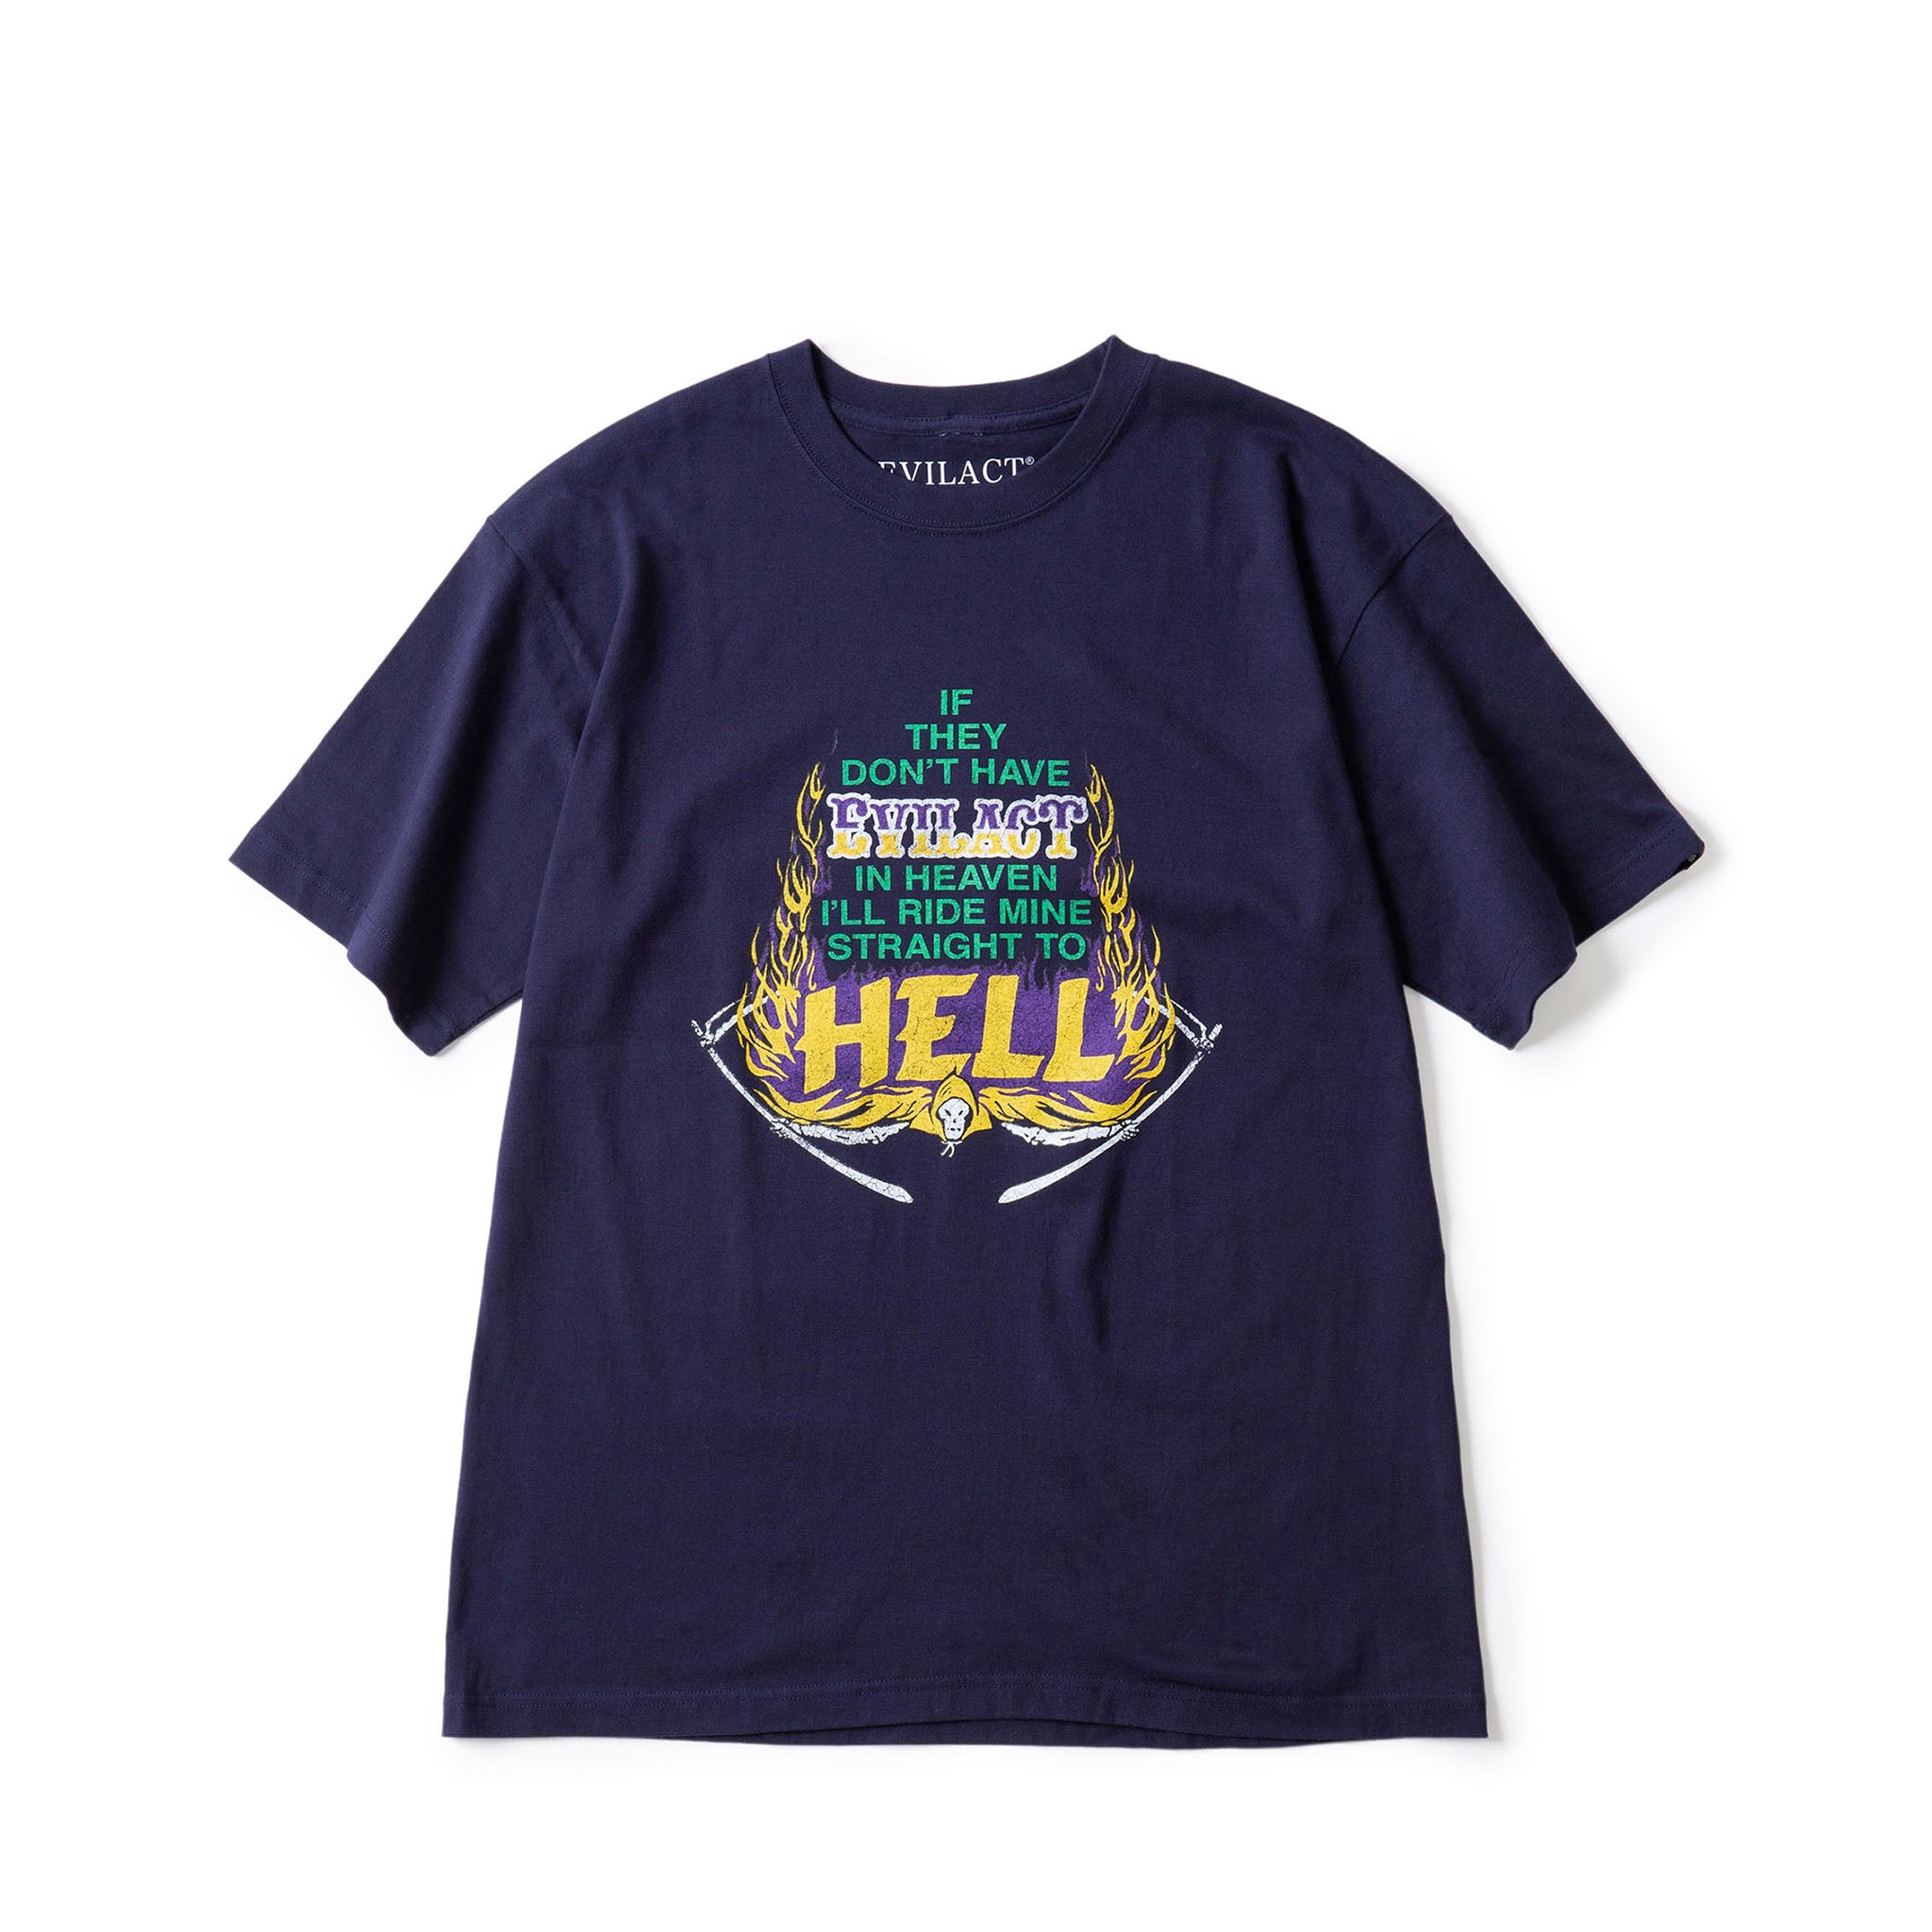 EVILACT HELL T's S/S | EVILACT (イーブルアクト）Official Site 